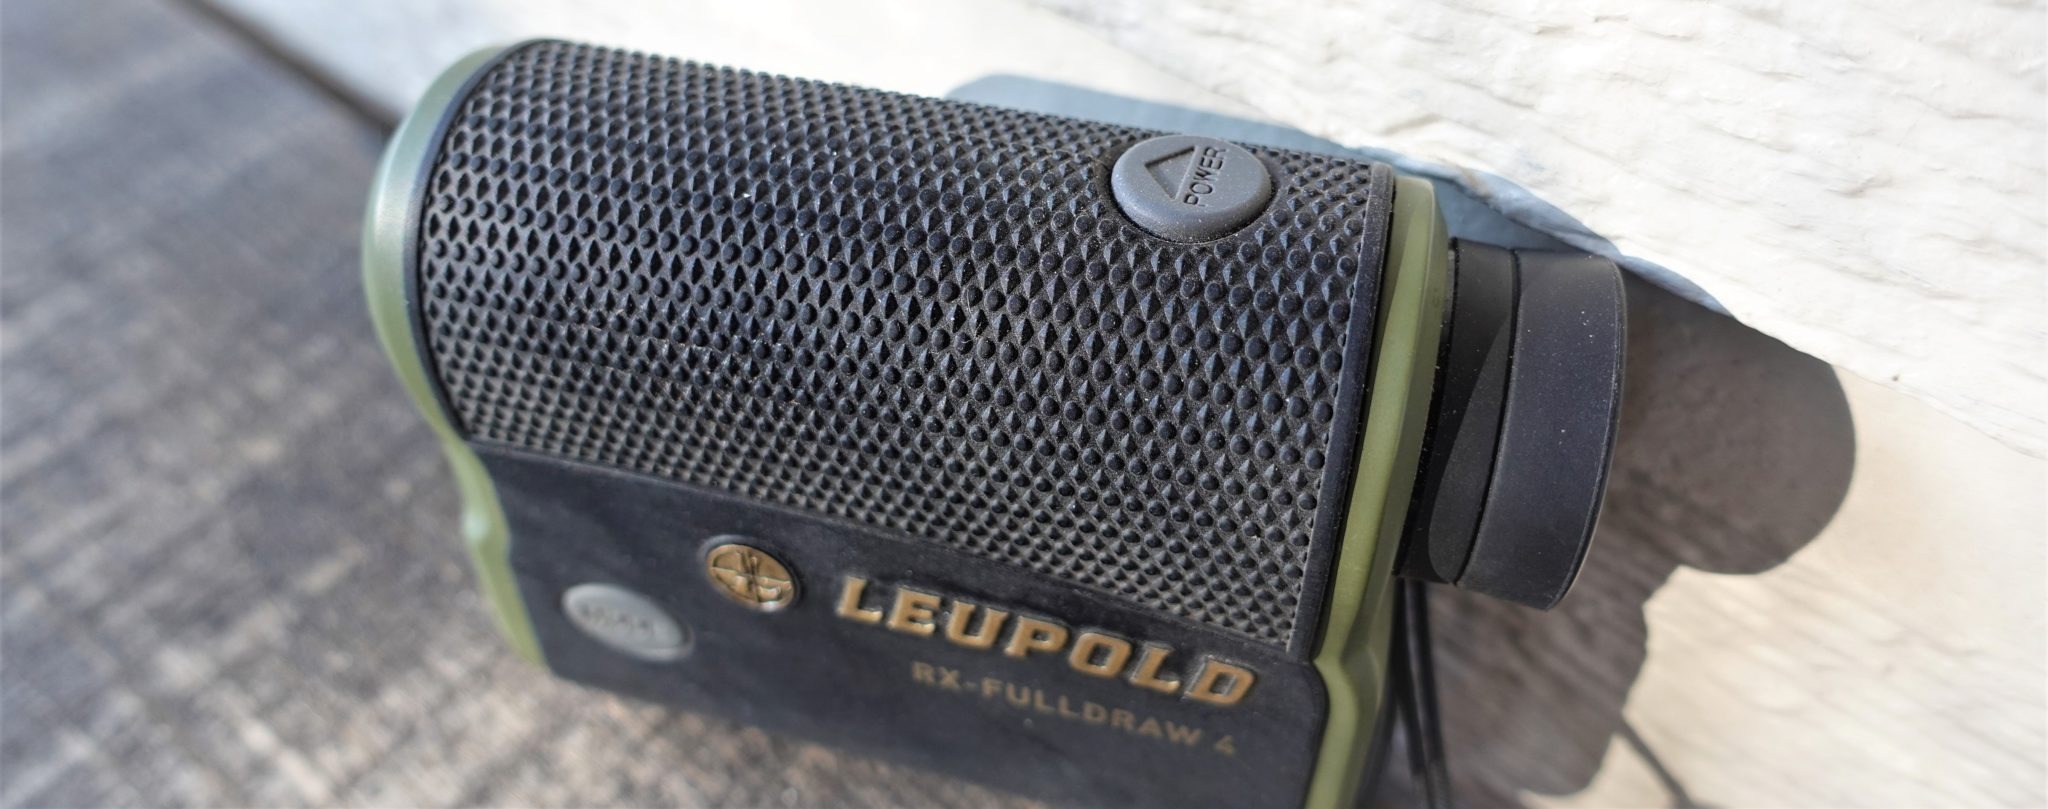 Leupold Full Draw 4 Review Best Rangefinder For Bow Hunting